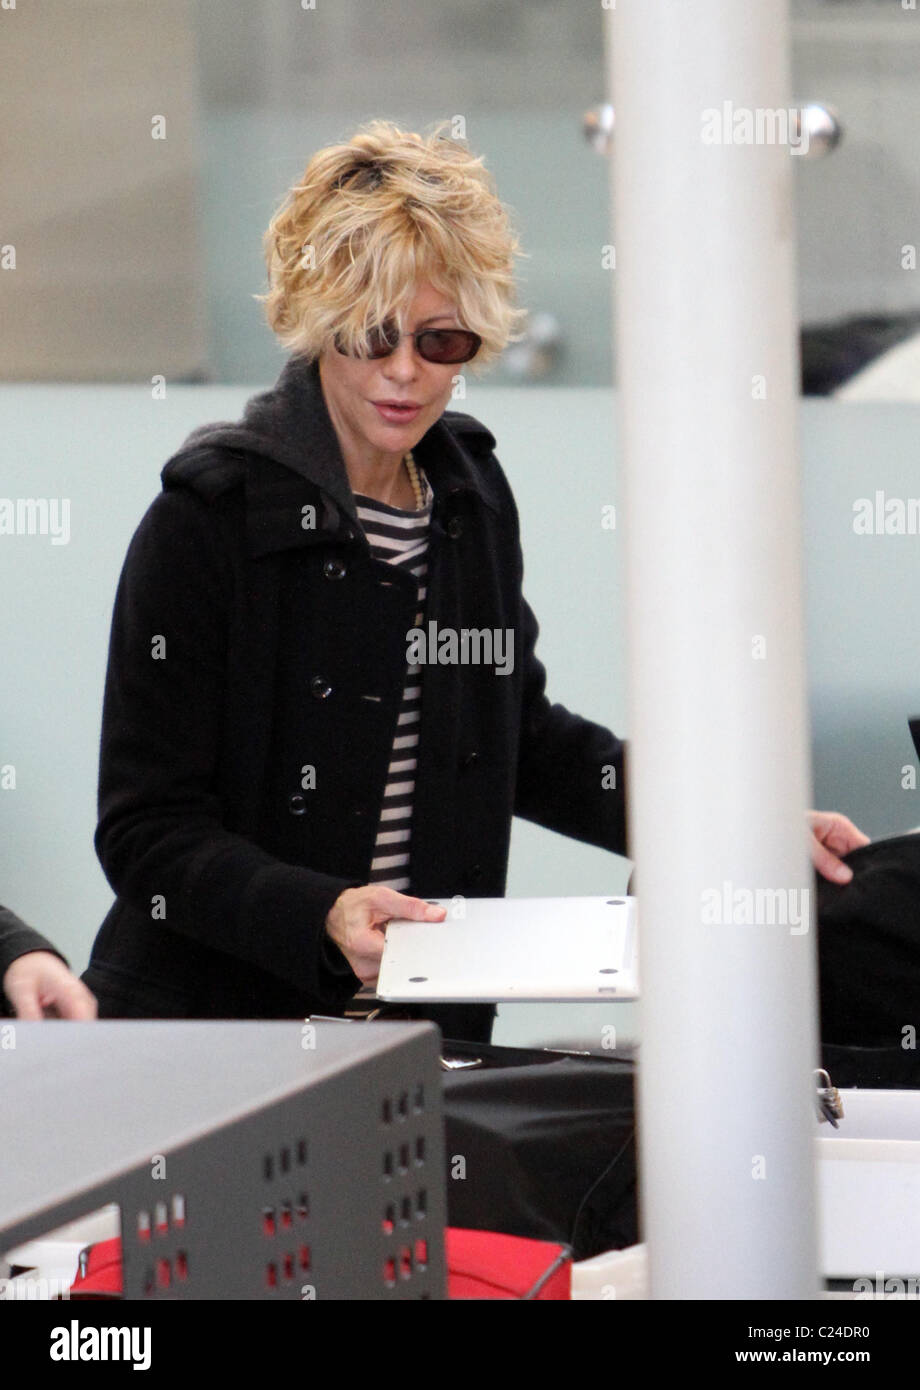 Actress Meg Ryan going through security at LAX airport to catch a flight Los Angeles, California, USA - 07.11.09 Stock Photo